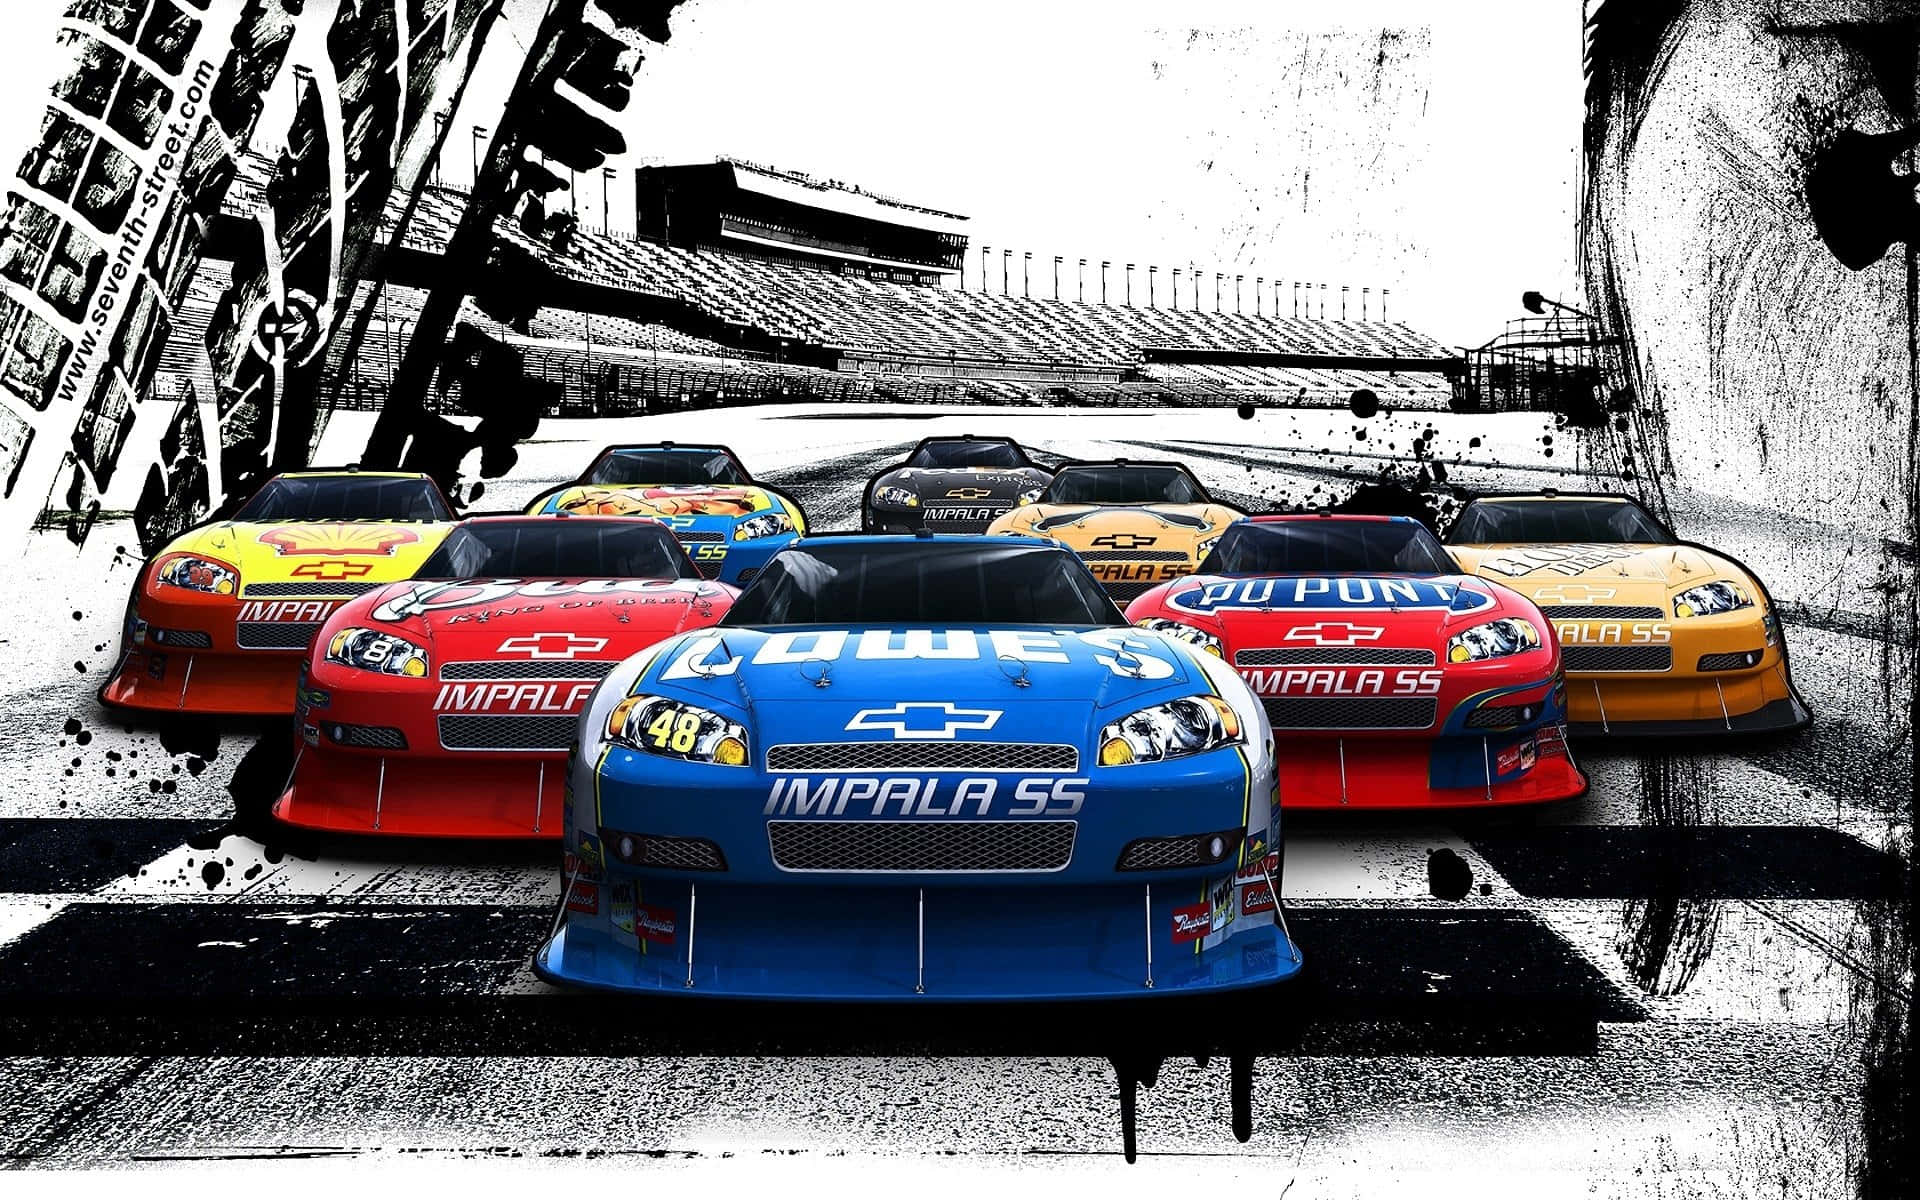 Thrills And Speed - Intense Nascar Race Moment Background